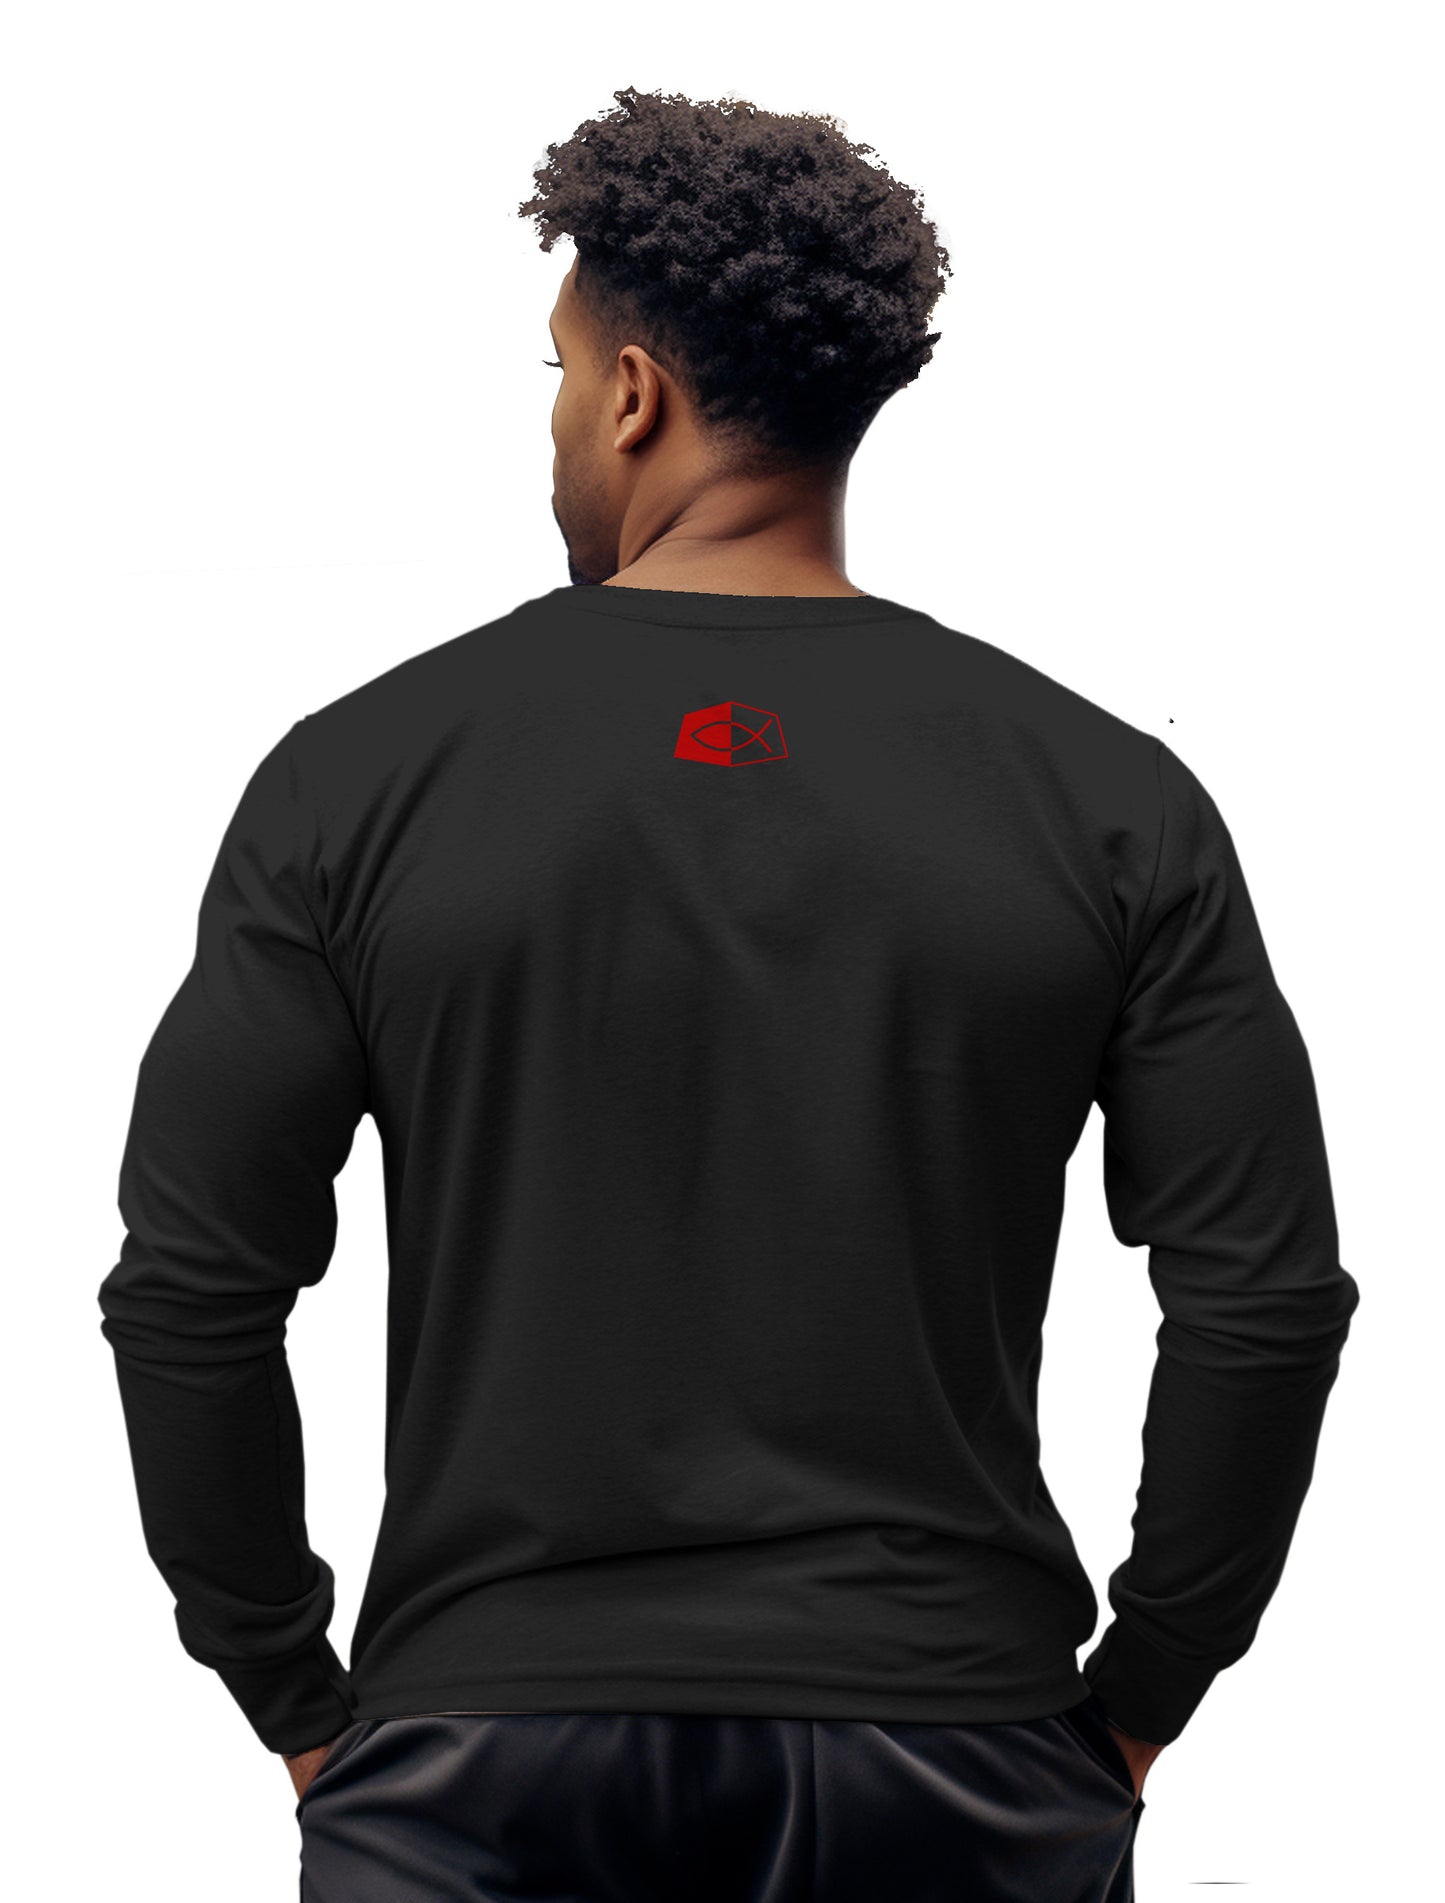 THE LORD IS MY STRENGTH  Exodus 15:2 - Men’s Long Sleeve Shirt